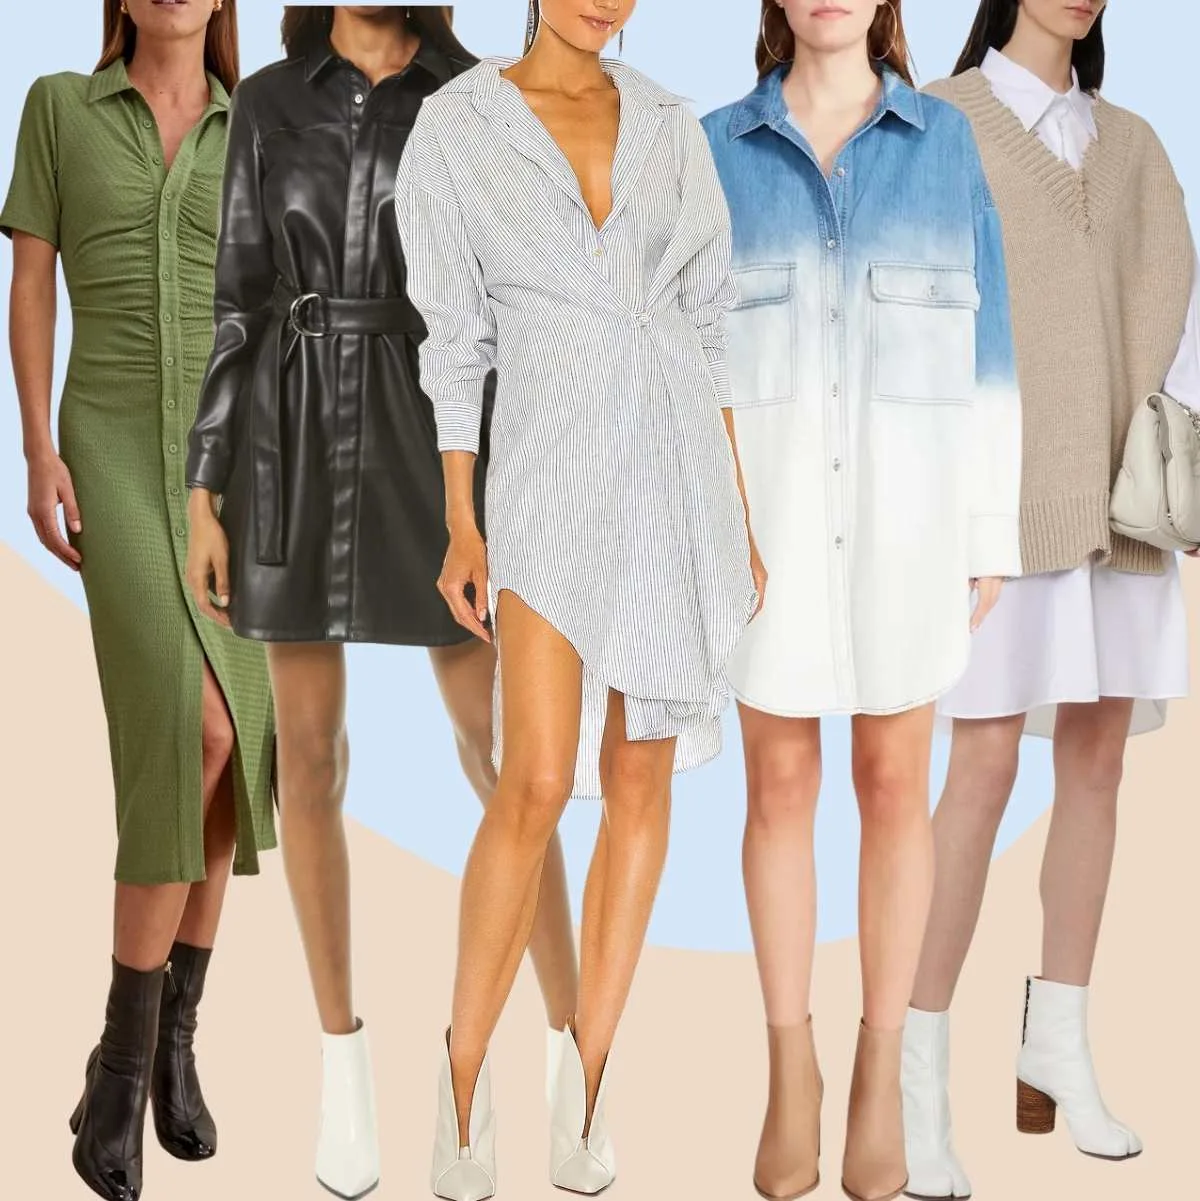 Collage of 5 women wearing different ankle boots with a shirt dress.